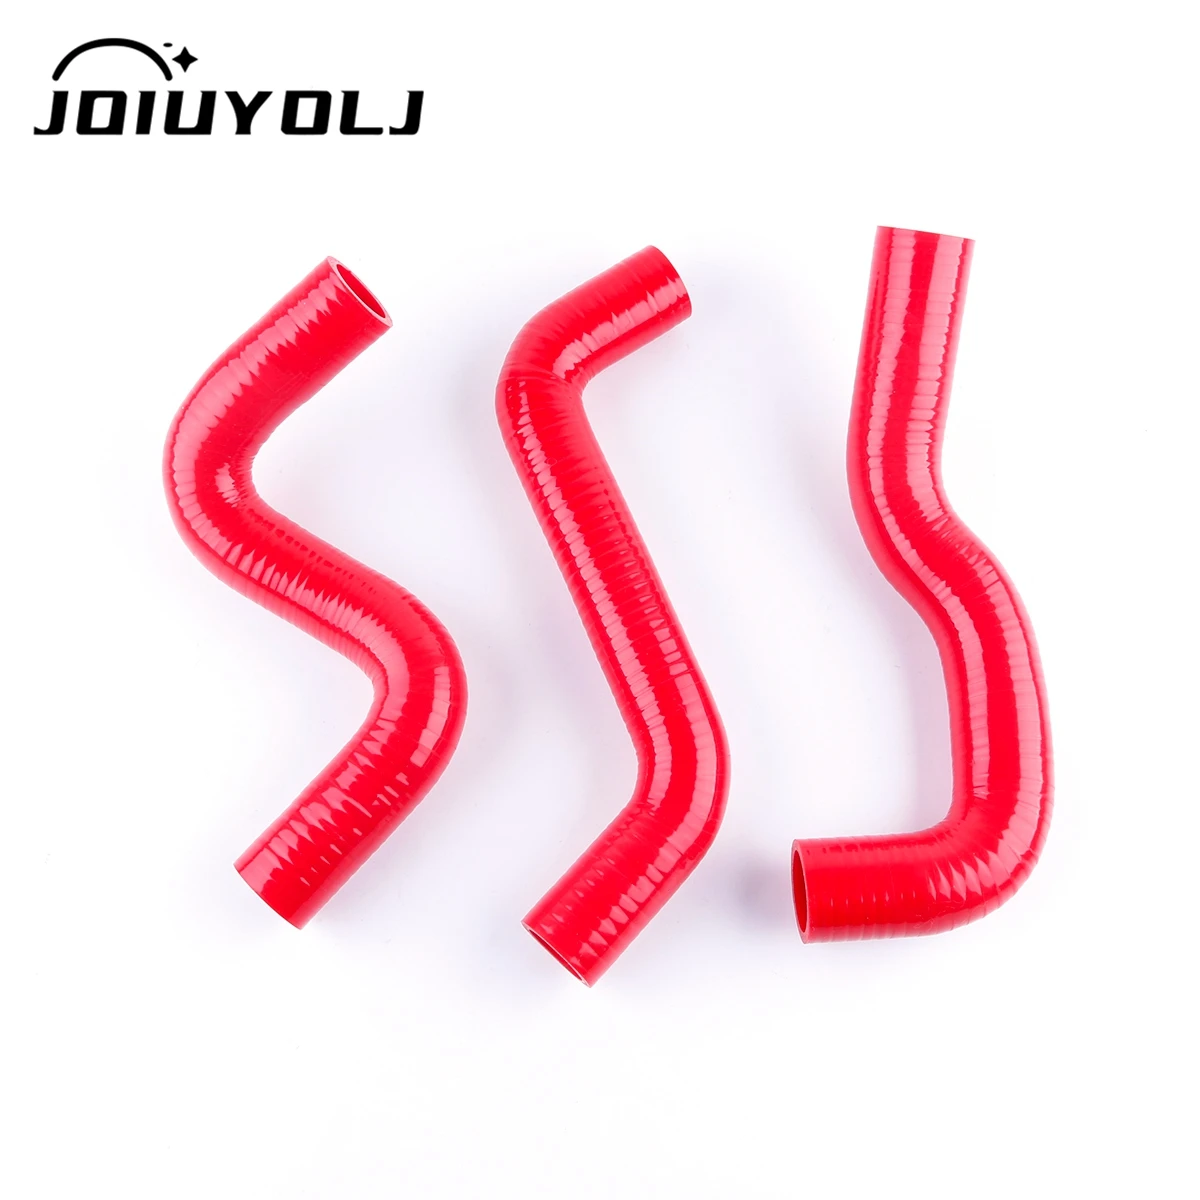 

Silicone Radiator Hose For TOYOTA Vits Yaris NCP91 XP90 4ZR-FE 1.6L 2005 2006 2007 2008 2009 2010 2011 2012 2013